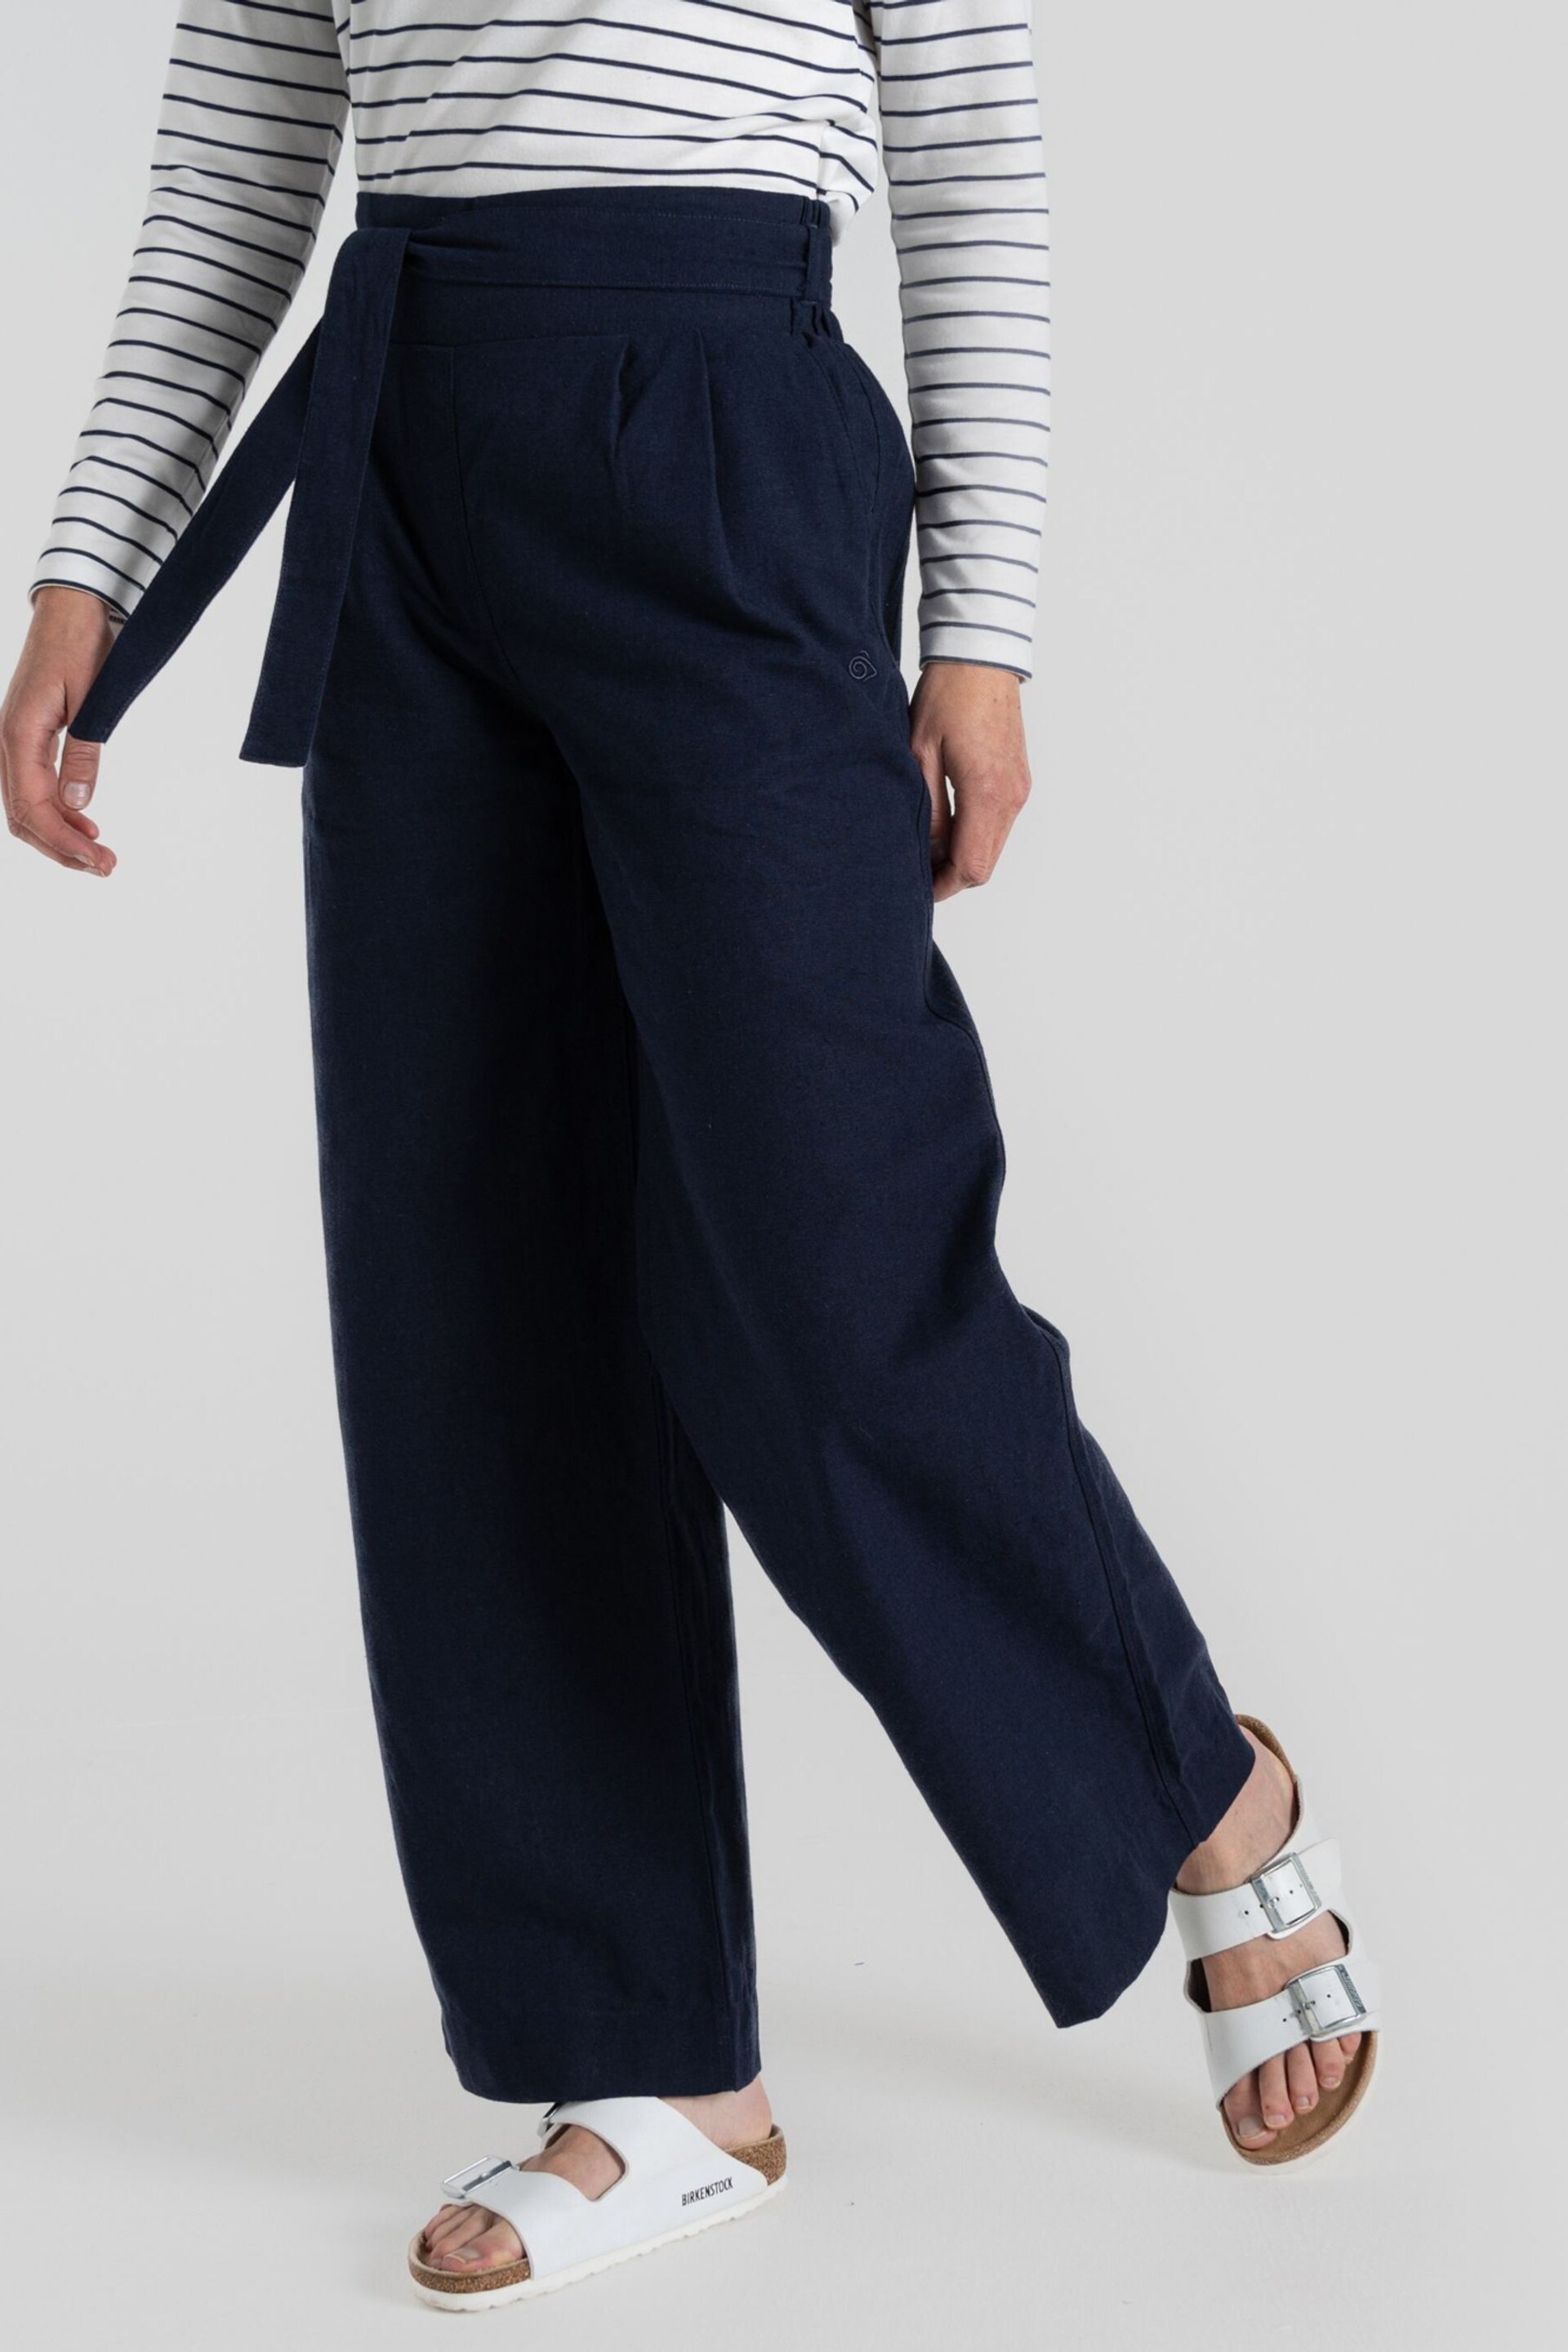 Craghoppers Blue Ophelia Trousers - Image 4 of 6